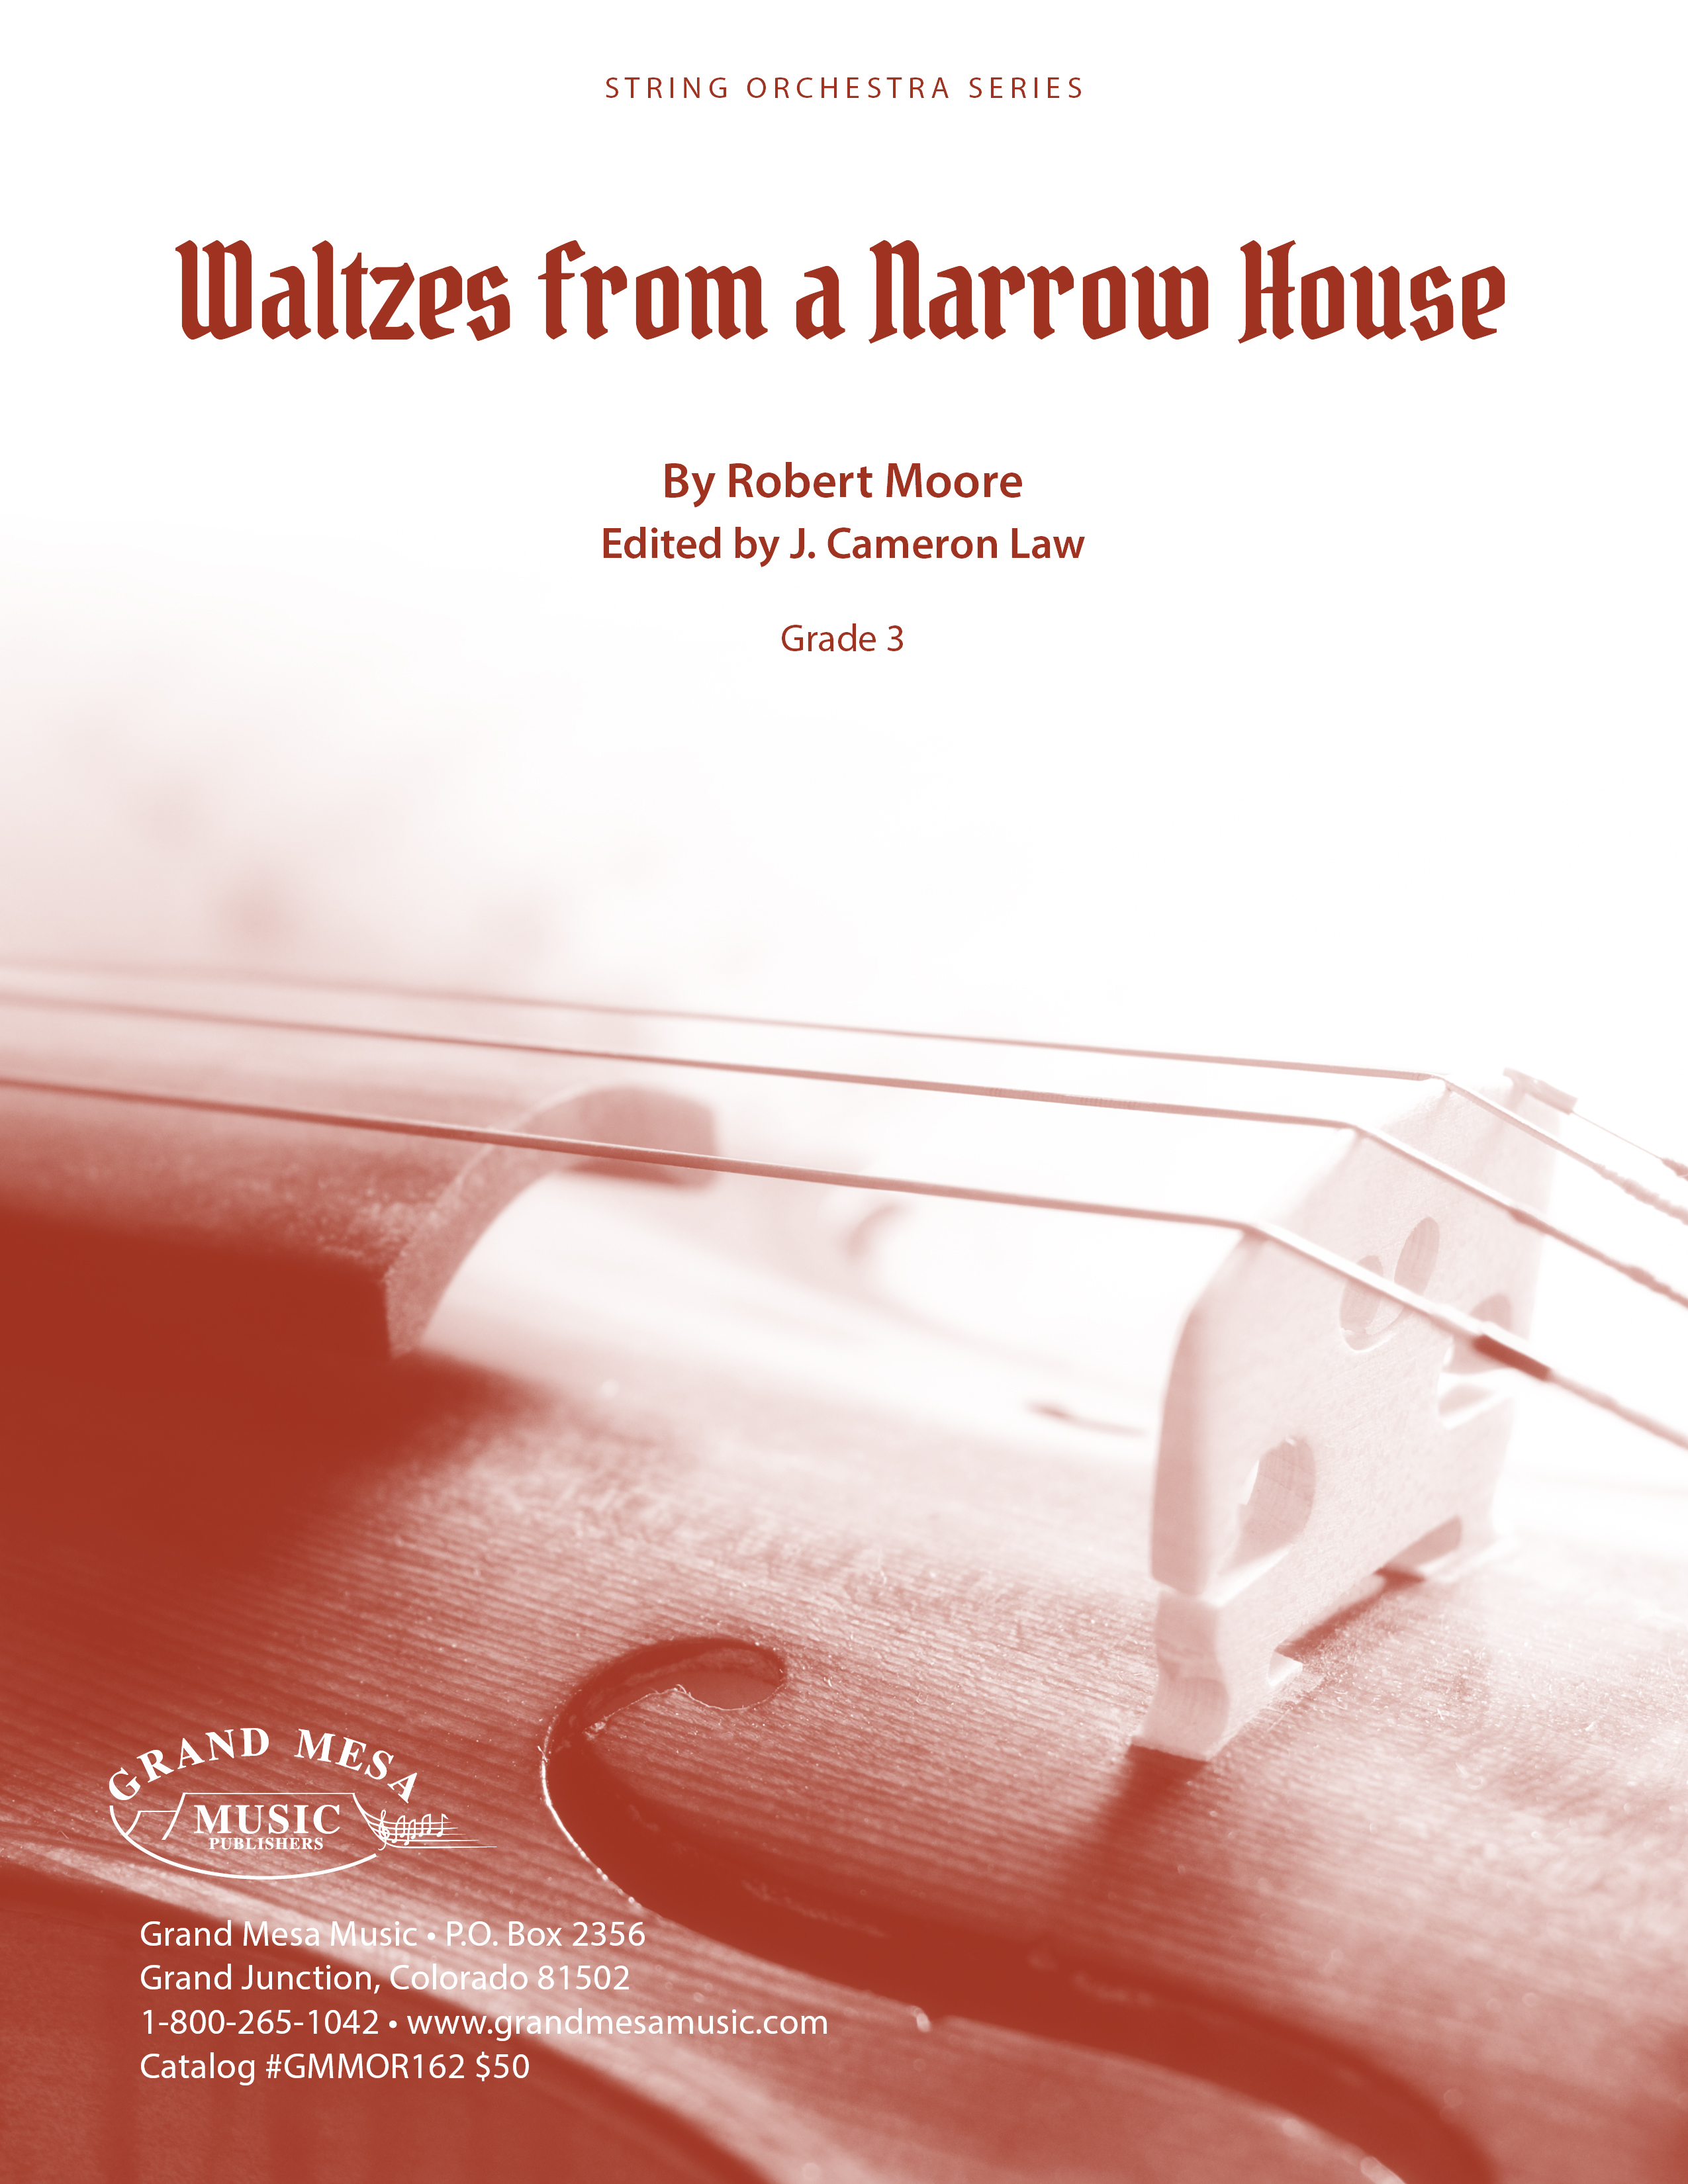 Waltzes from a Narrow House